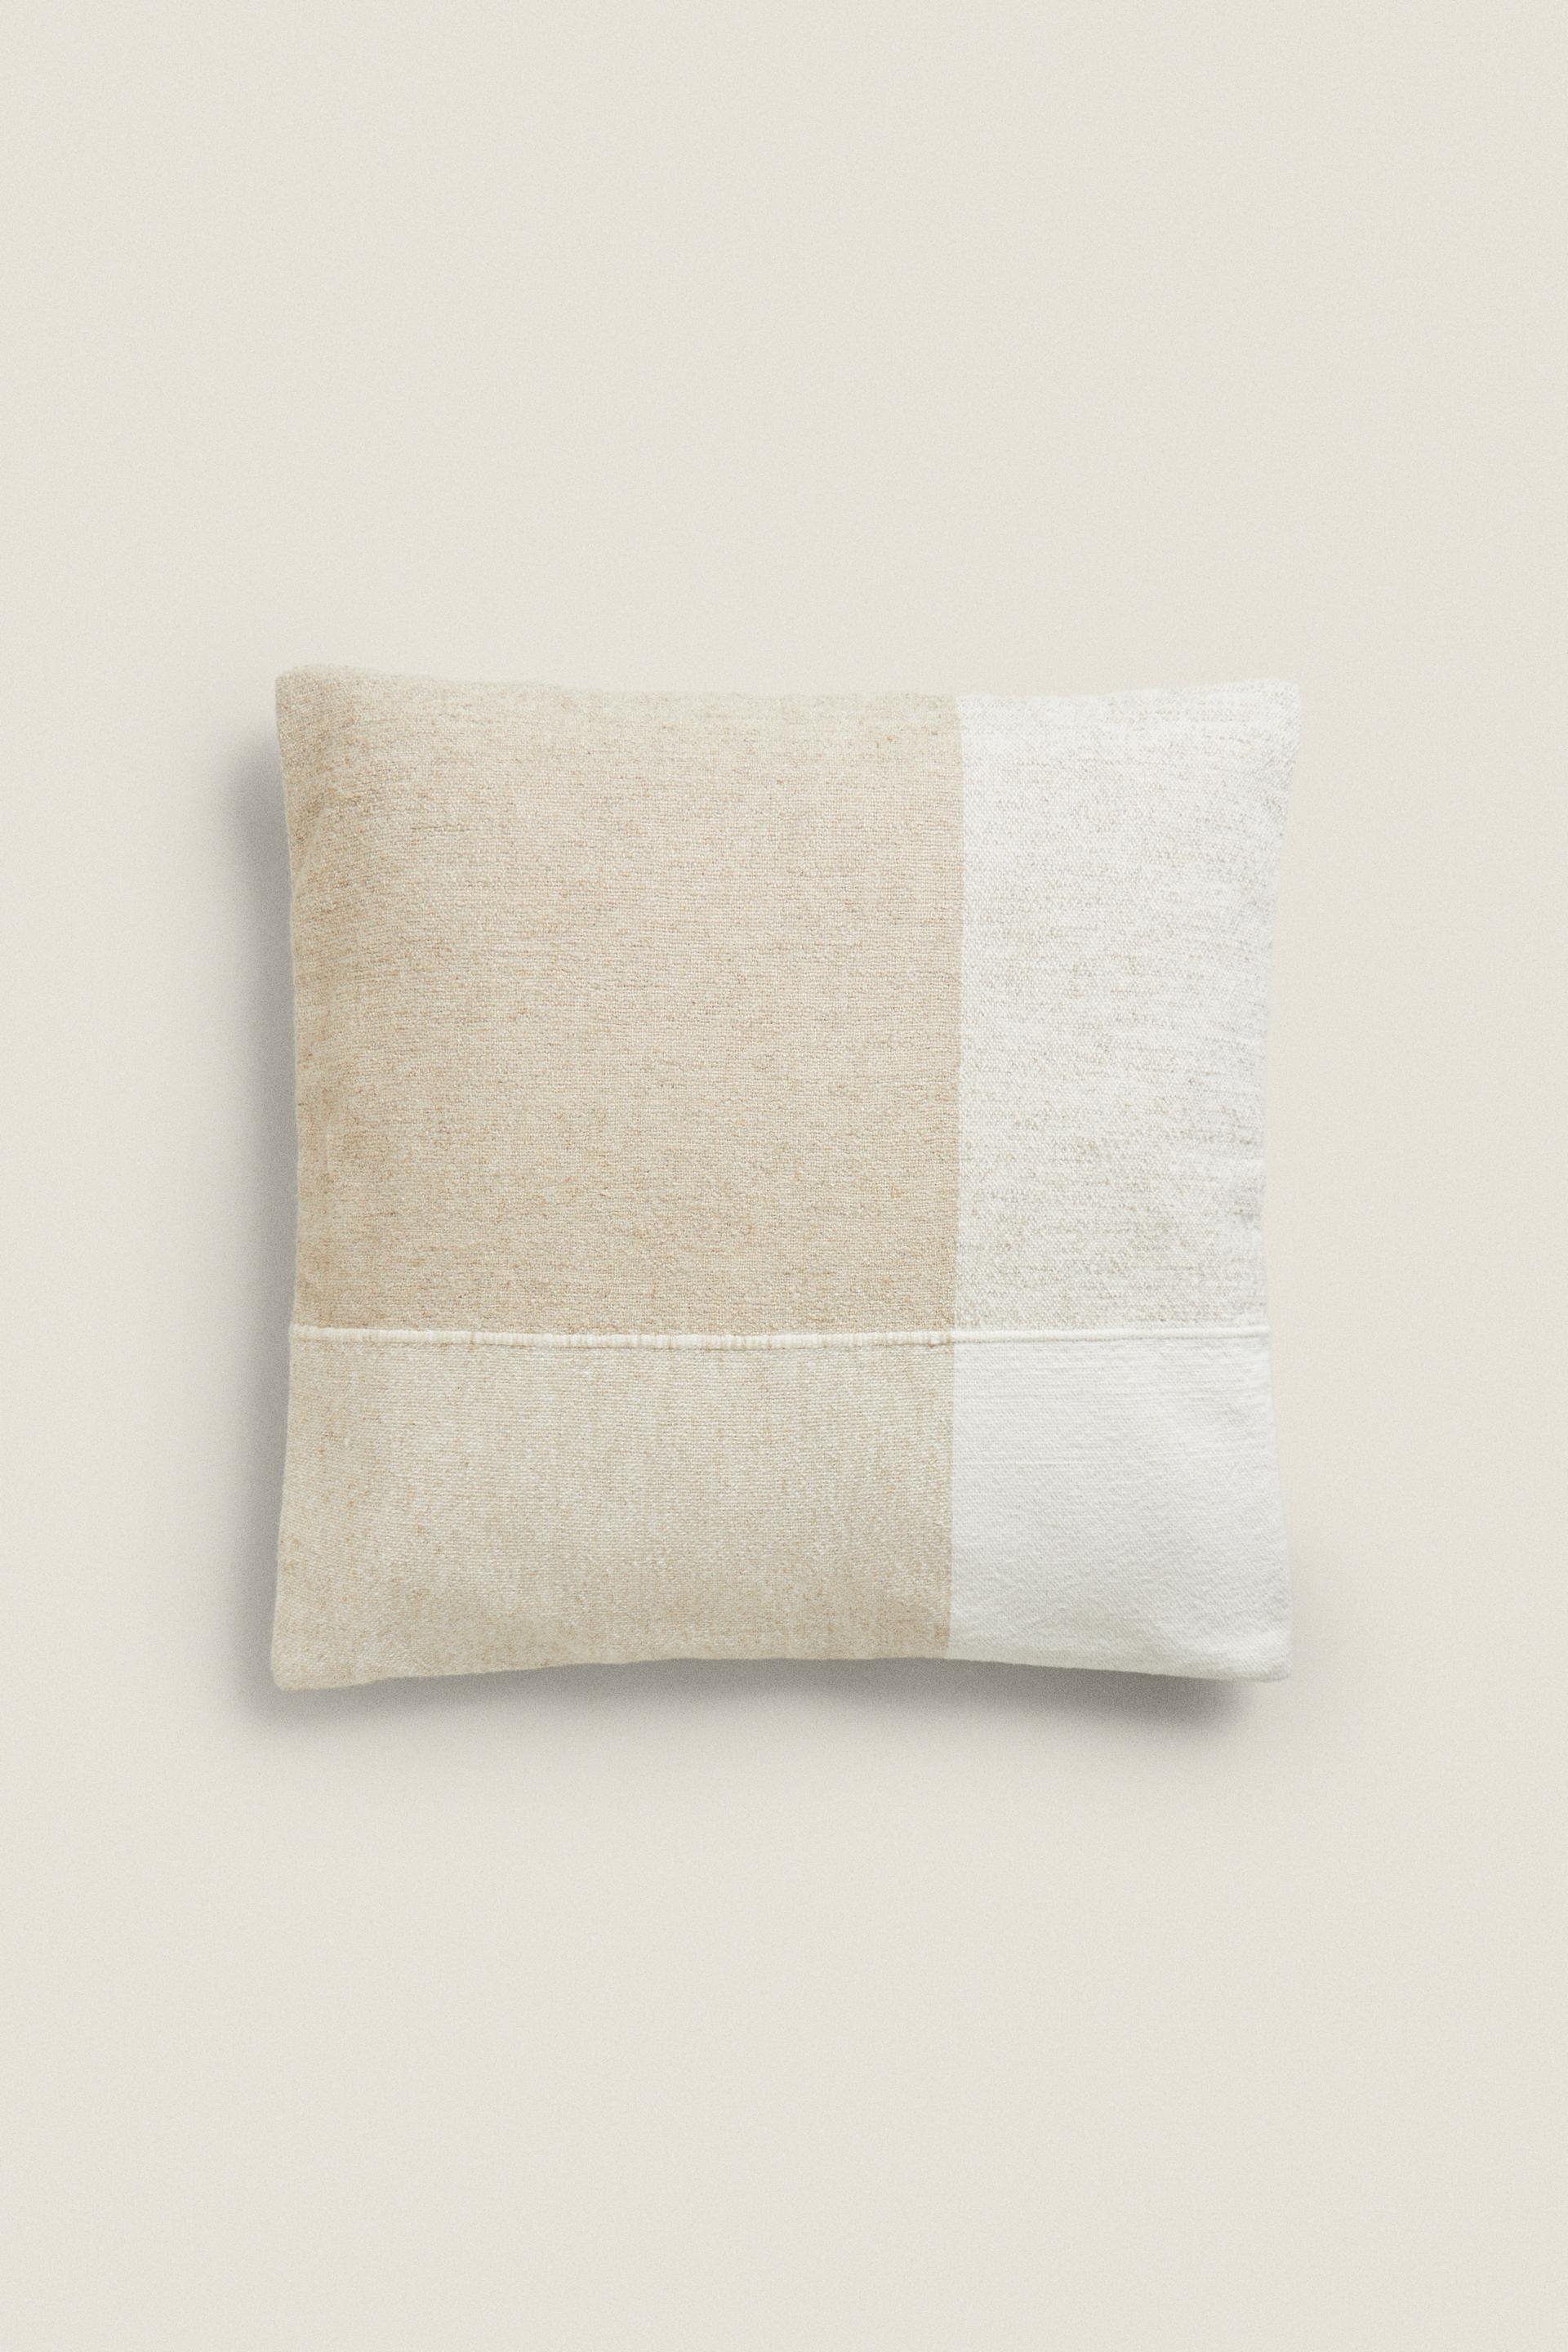 EMBROIDERED LINE THROW PILLOW COVER ZARA